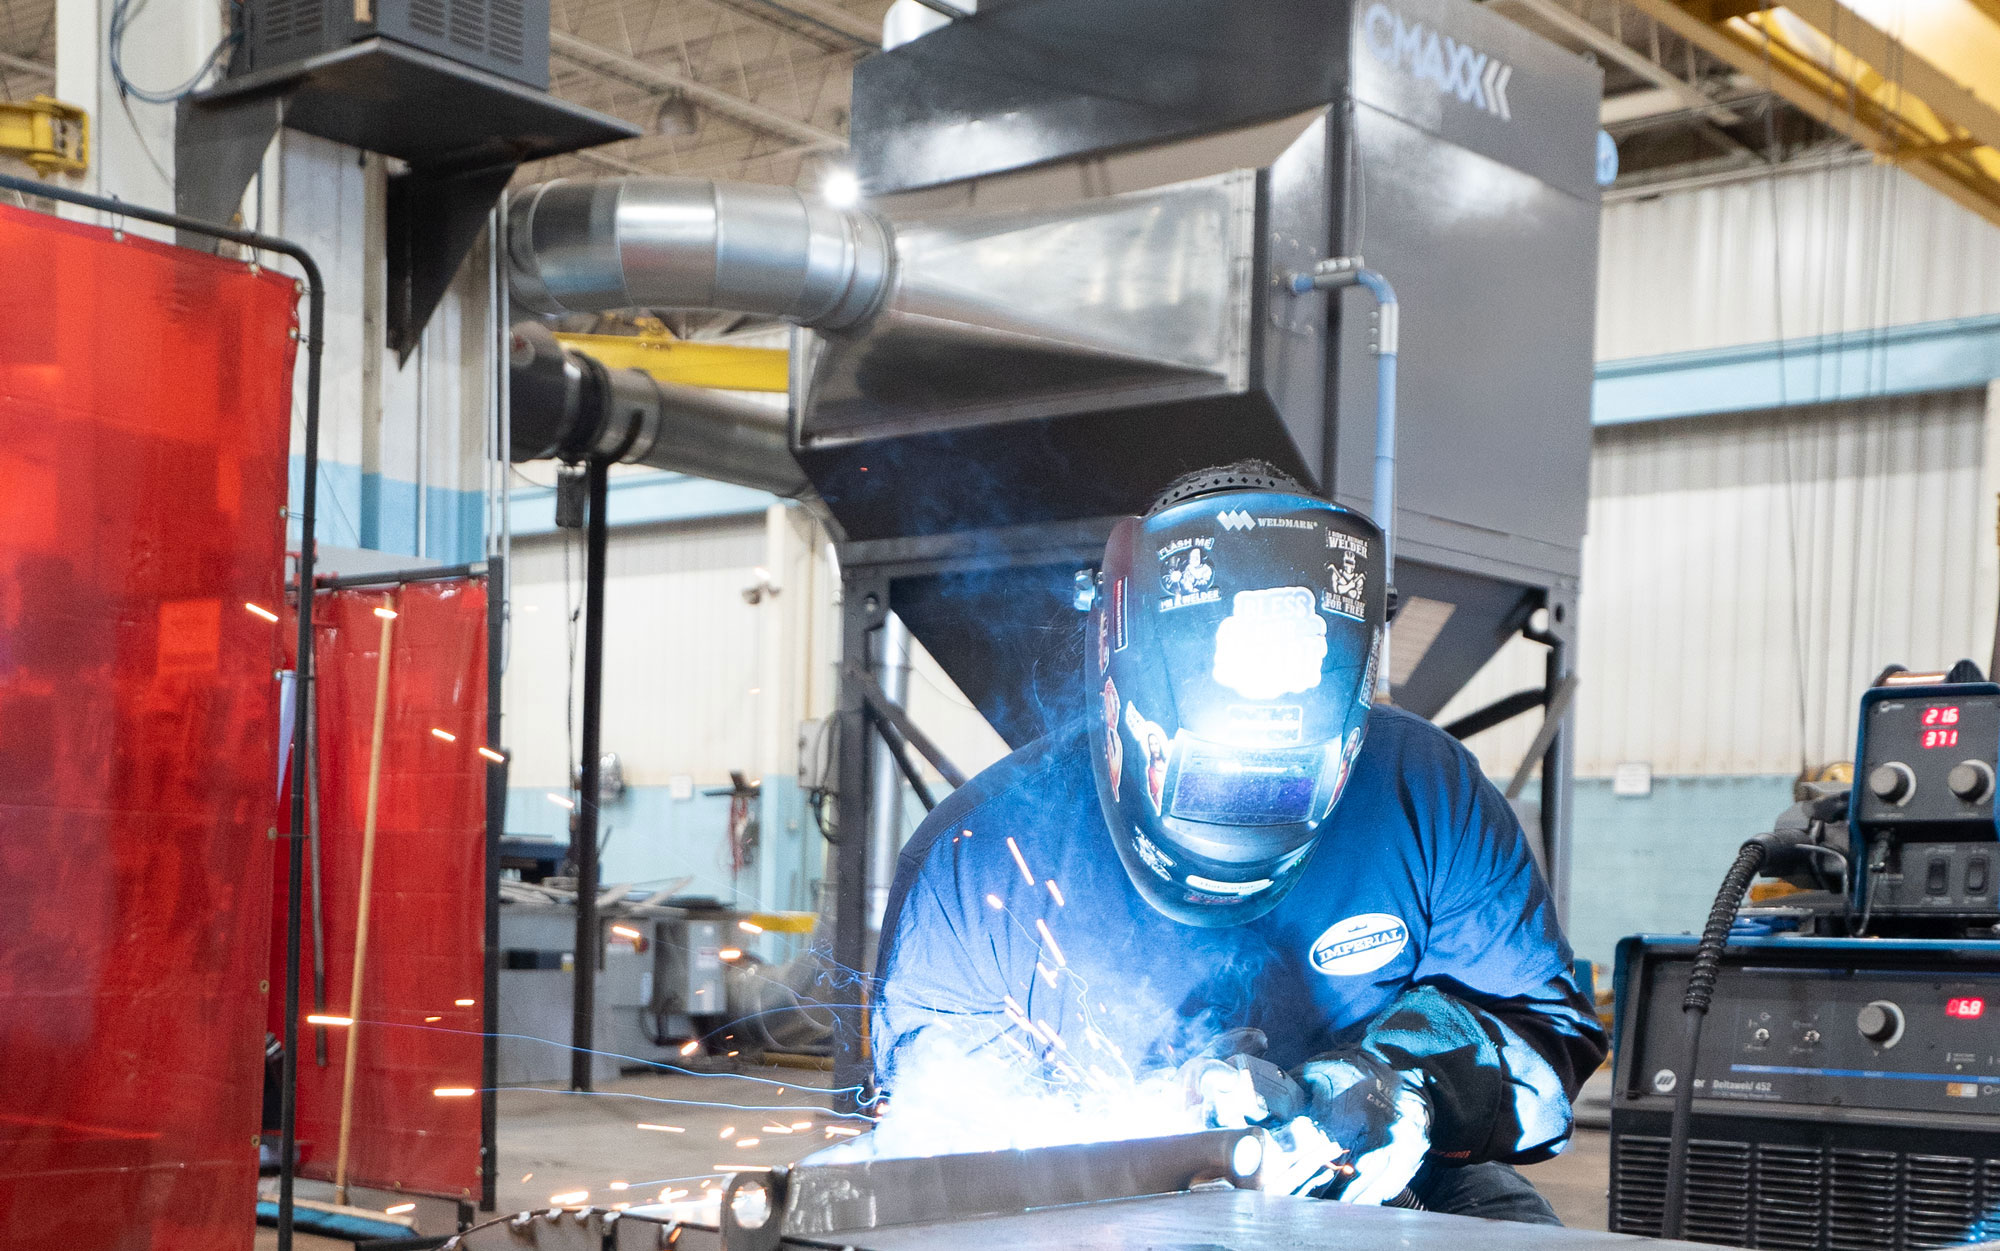 A welder working in a quality work environment, which greatly improves employee retention.